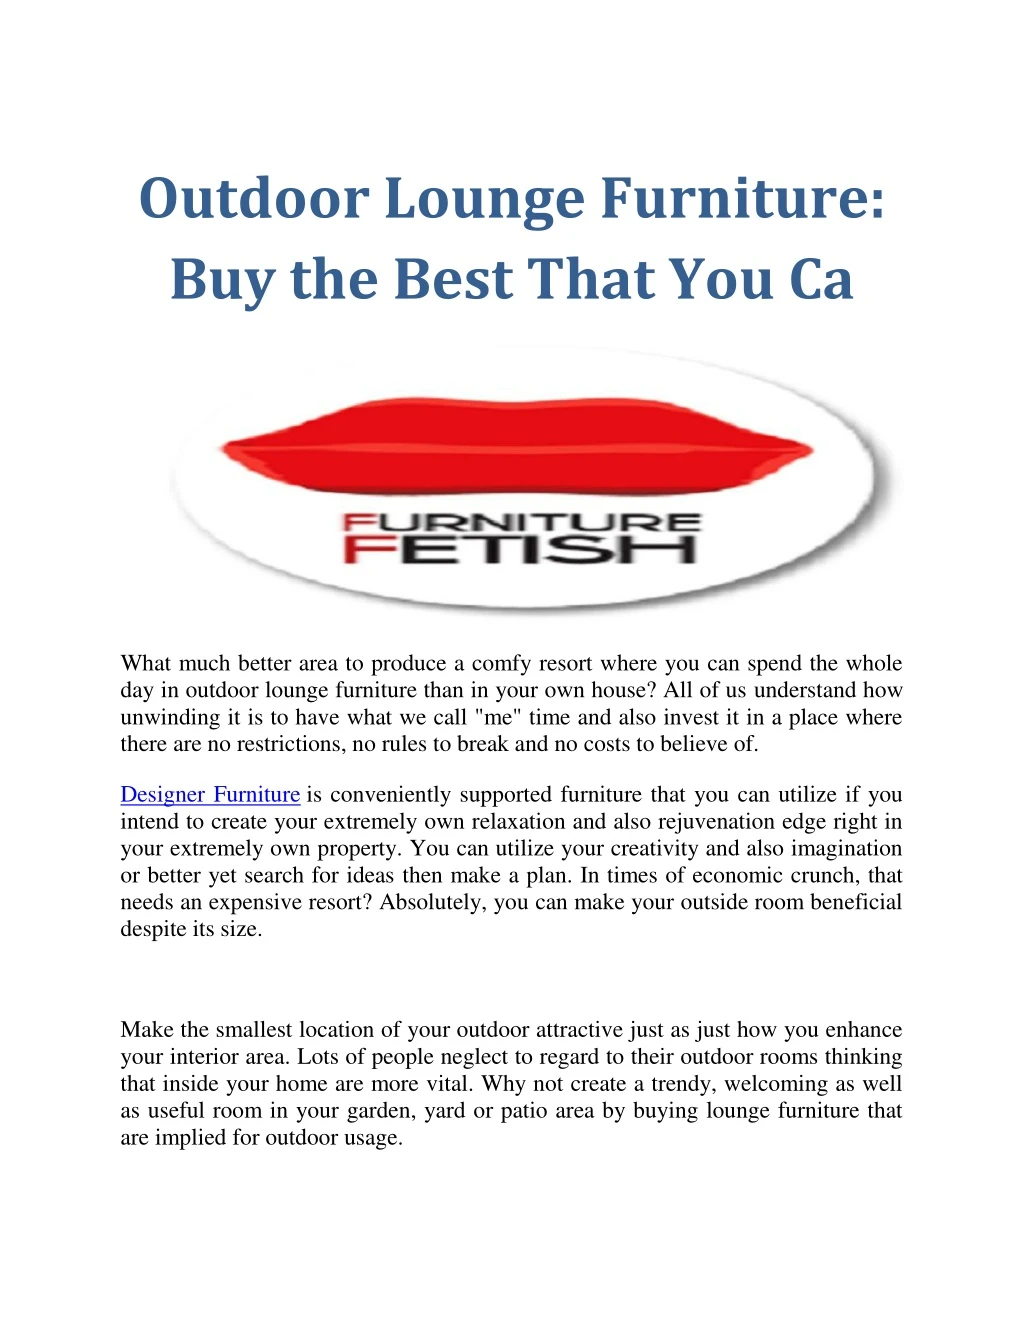 outdoor lounge furniture buy the best that you ca n.